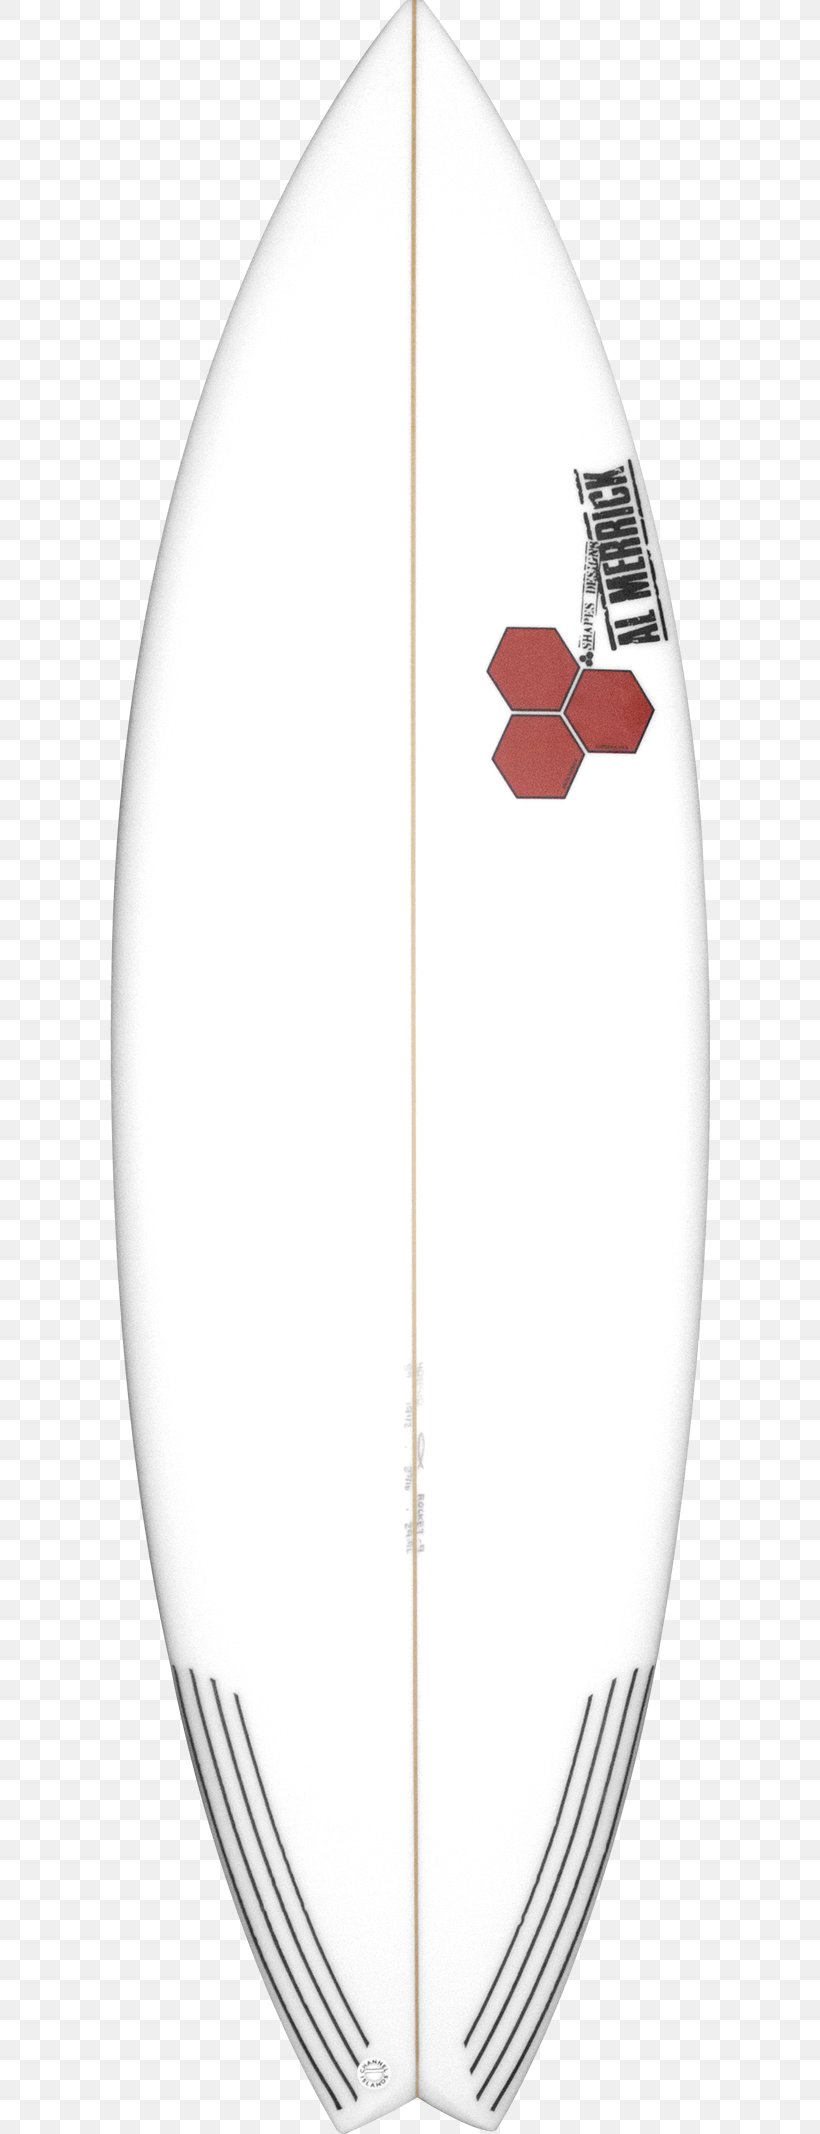 Surfboard Jasper Vos Scooters Surfing Go Fish IEEE 1394, PNG, 600x2134px, Surfboard, Discover Card, Go Fish, Great Lent, Ieee 1394 Download Free